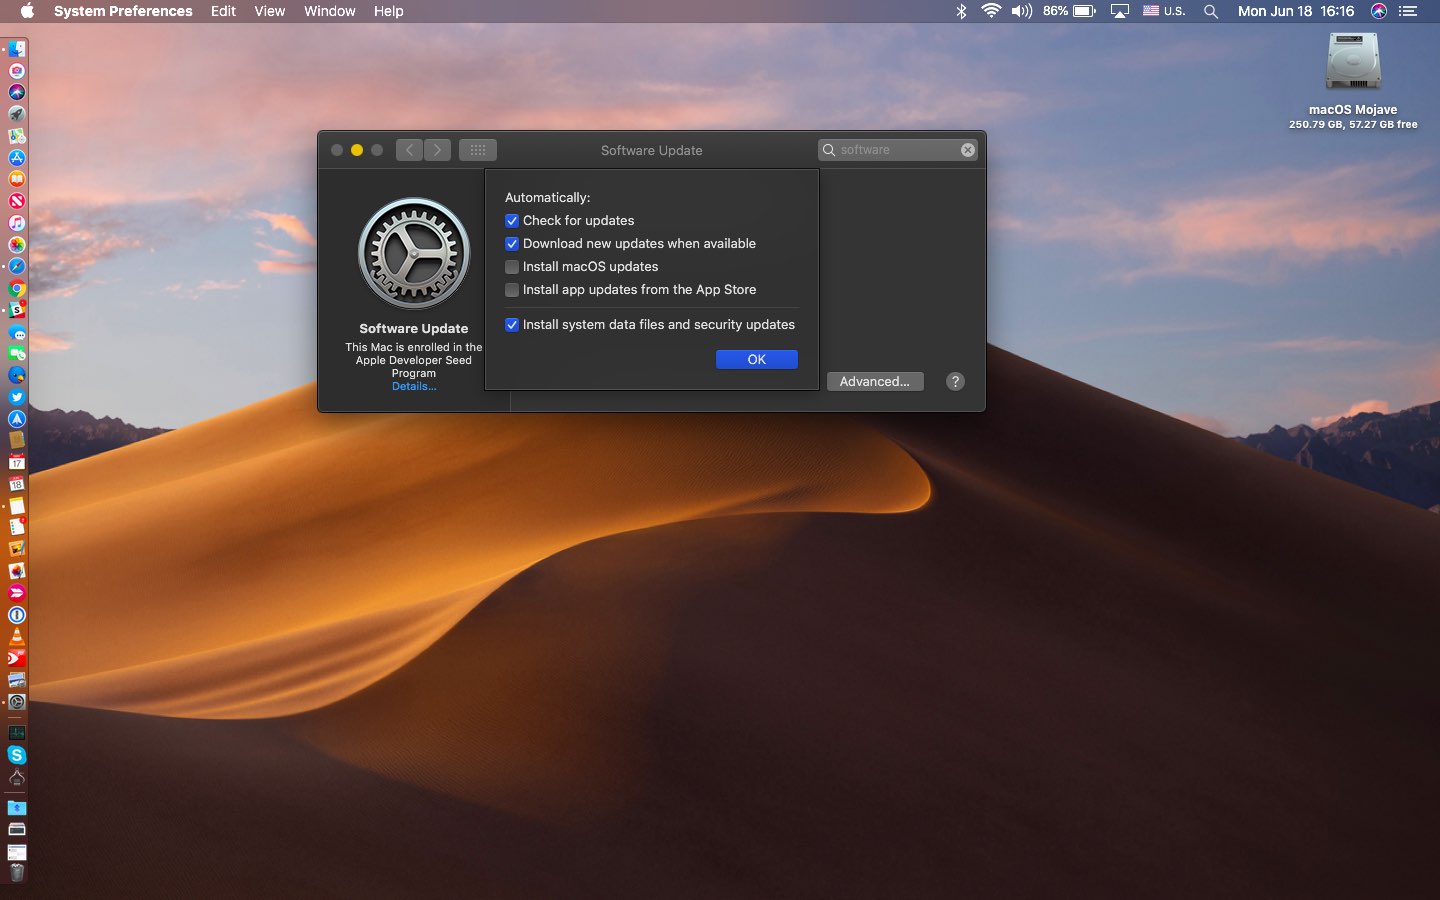 The Advanced screen of the Software Update preference pane in macOS Mojave